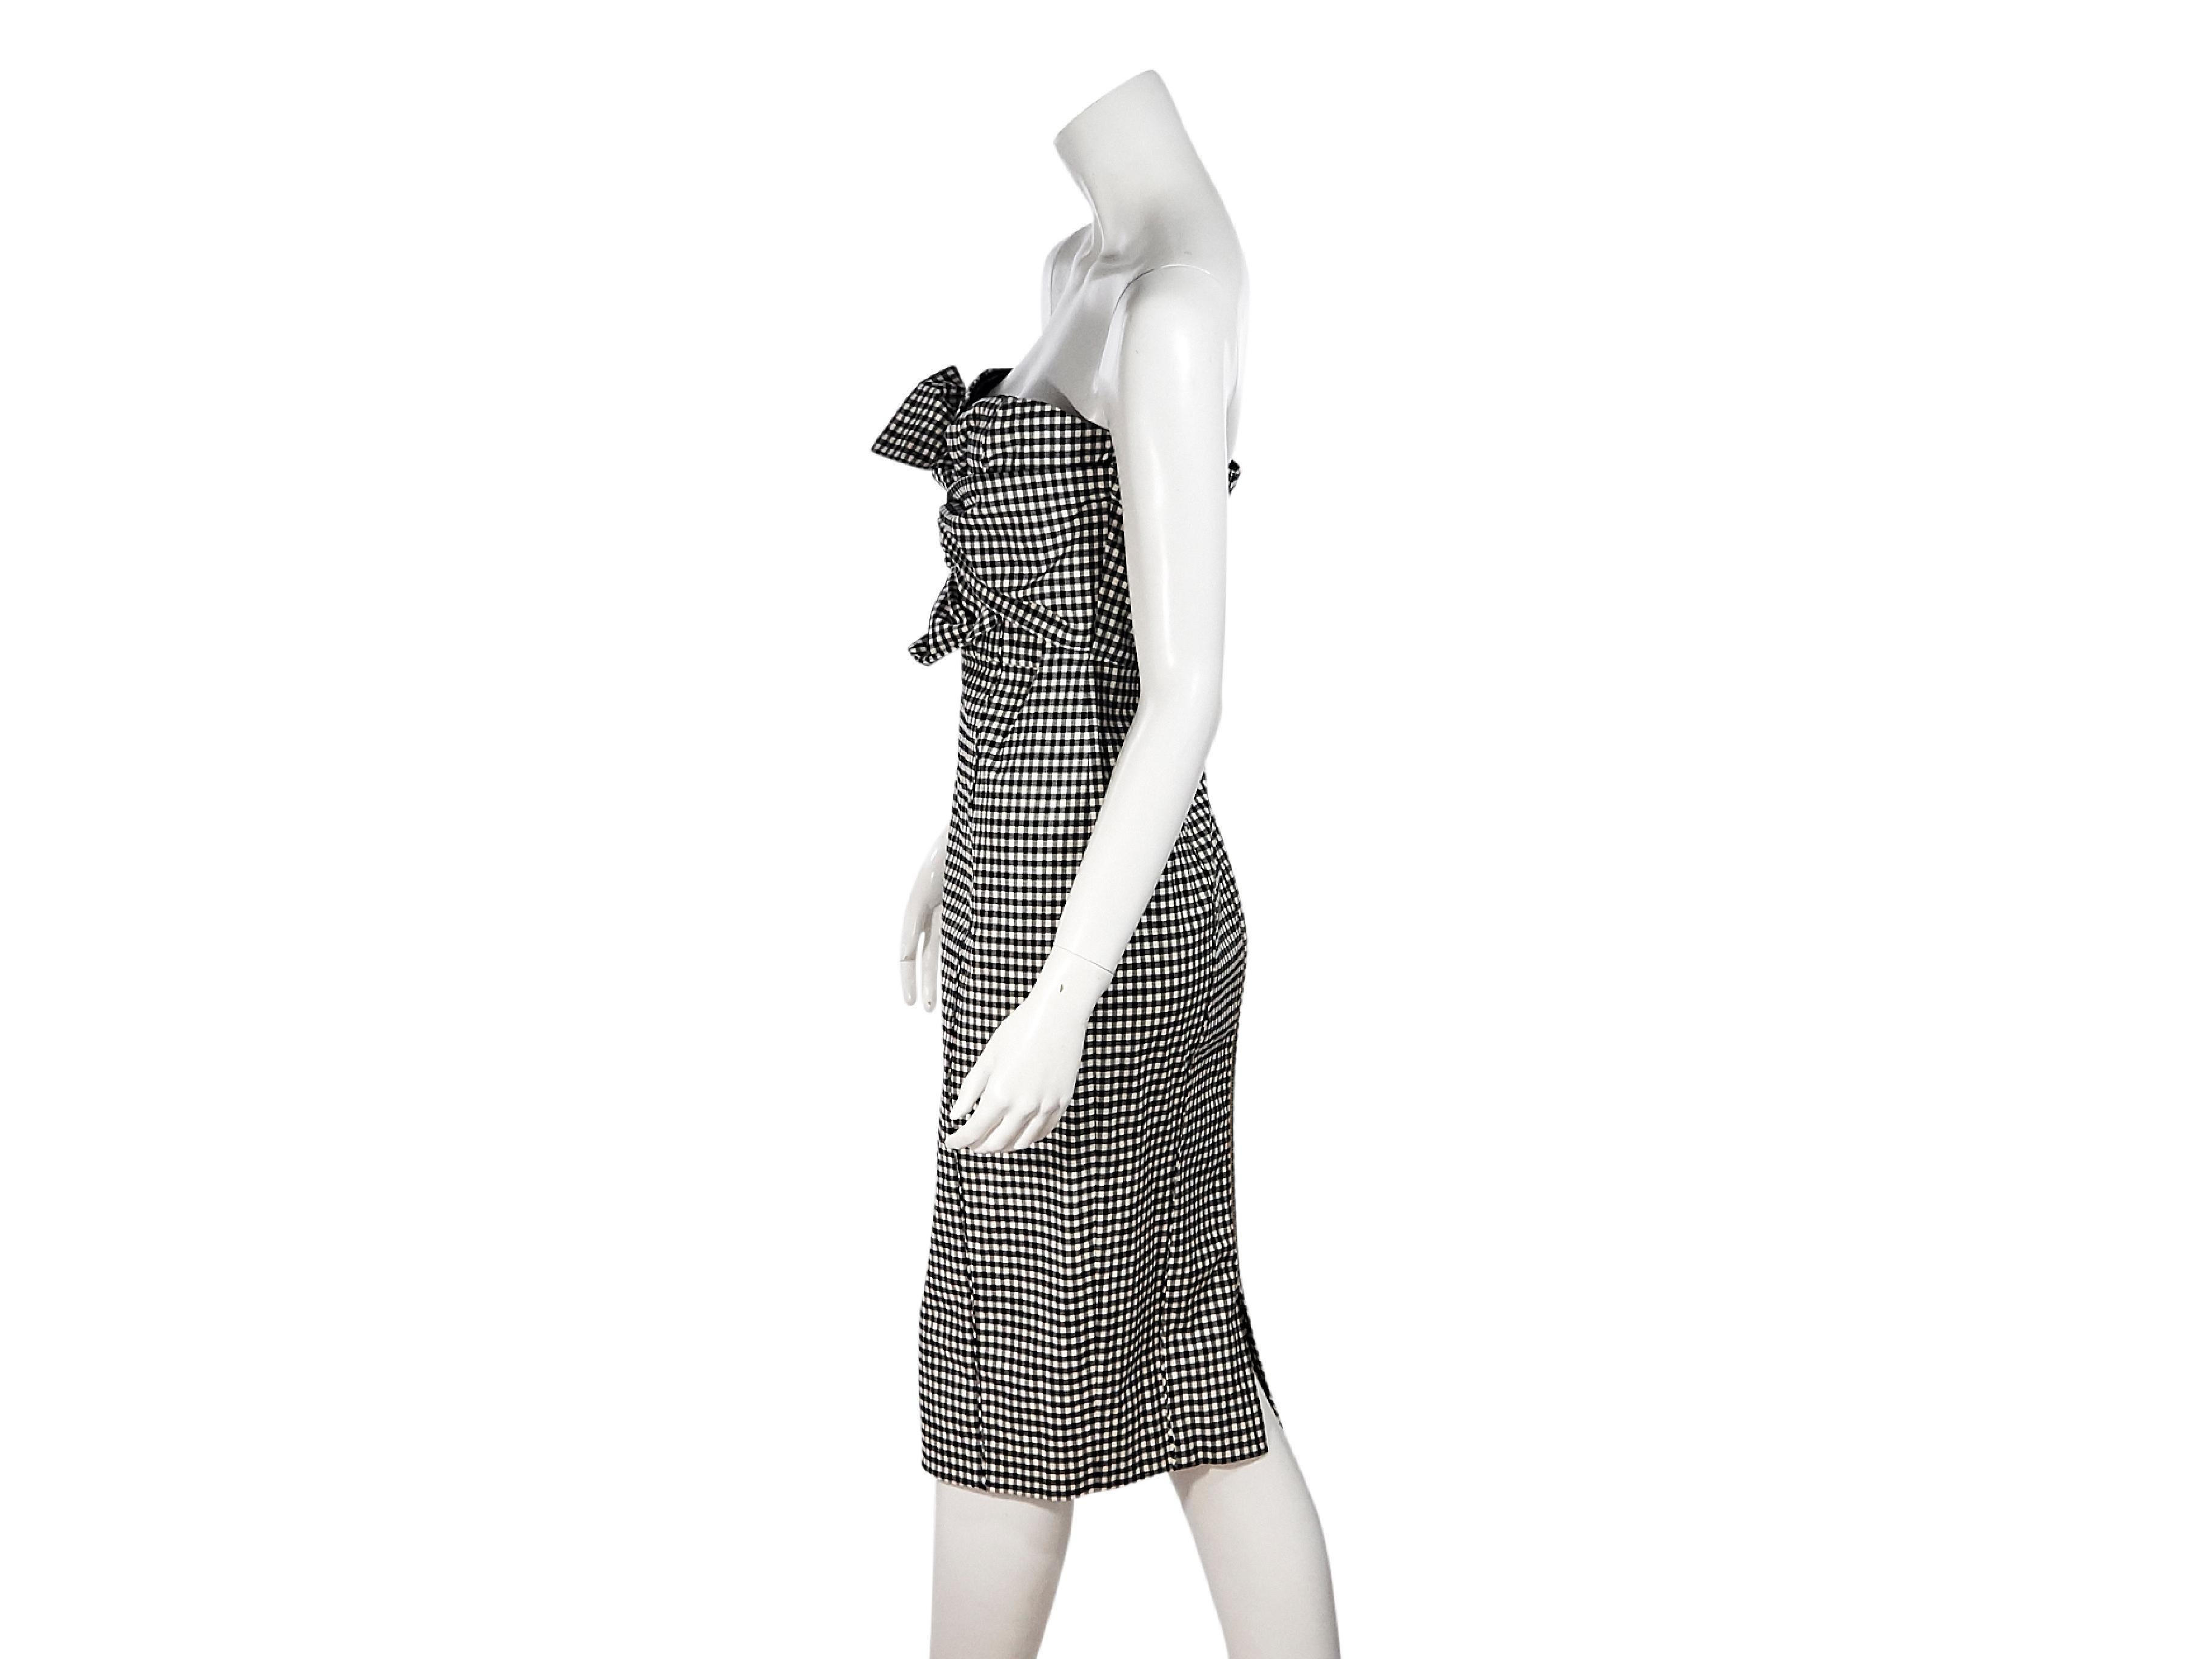 Product details:  Black and white cotton gingham Birdie Bow strapless dress by Veronica Beard.  Sweetheart neckline.  Tie-front detail at bodice.  Exposed back zip closure.  Back hem slit.  30